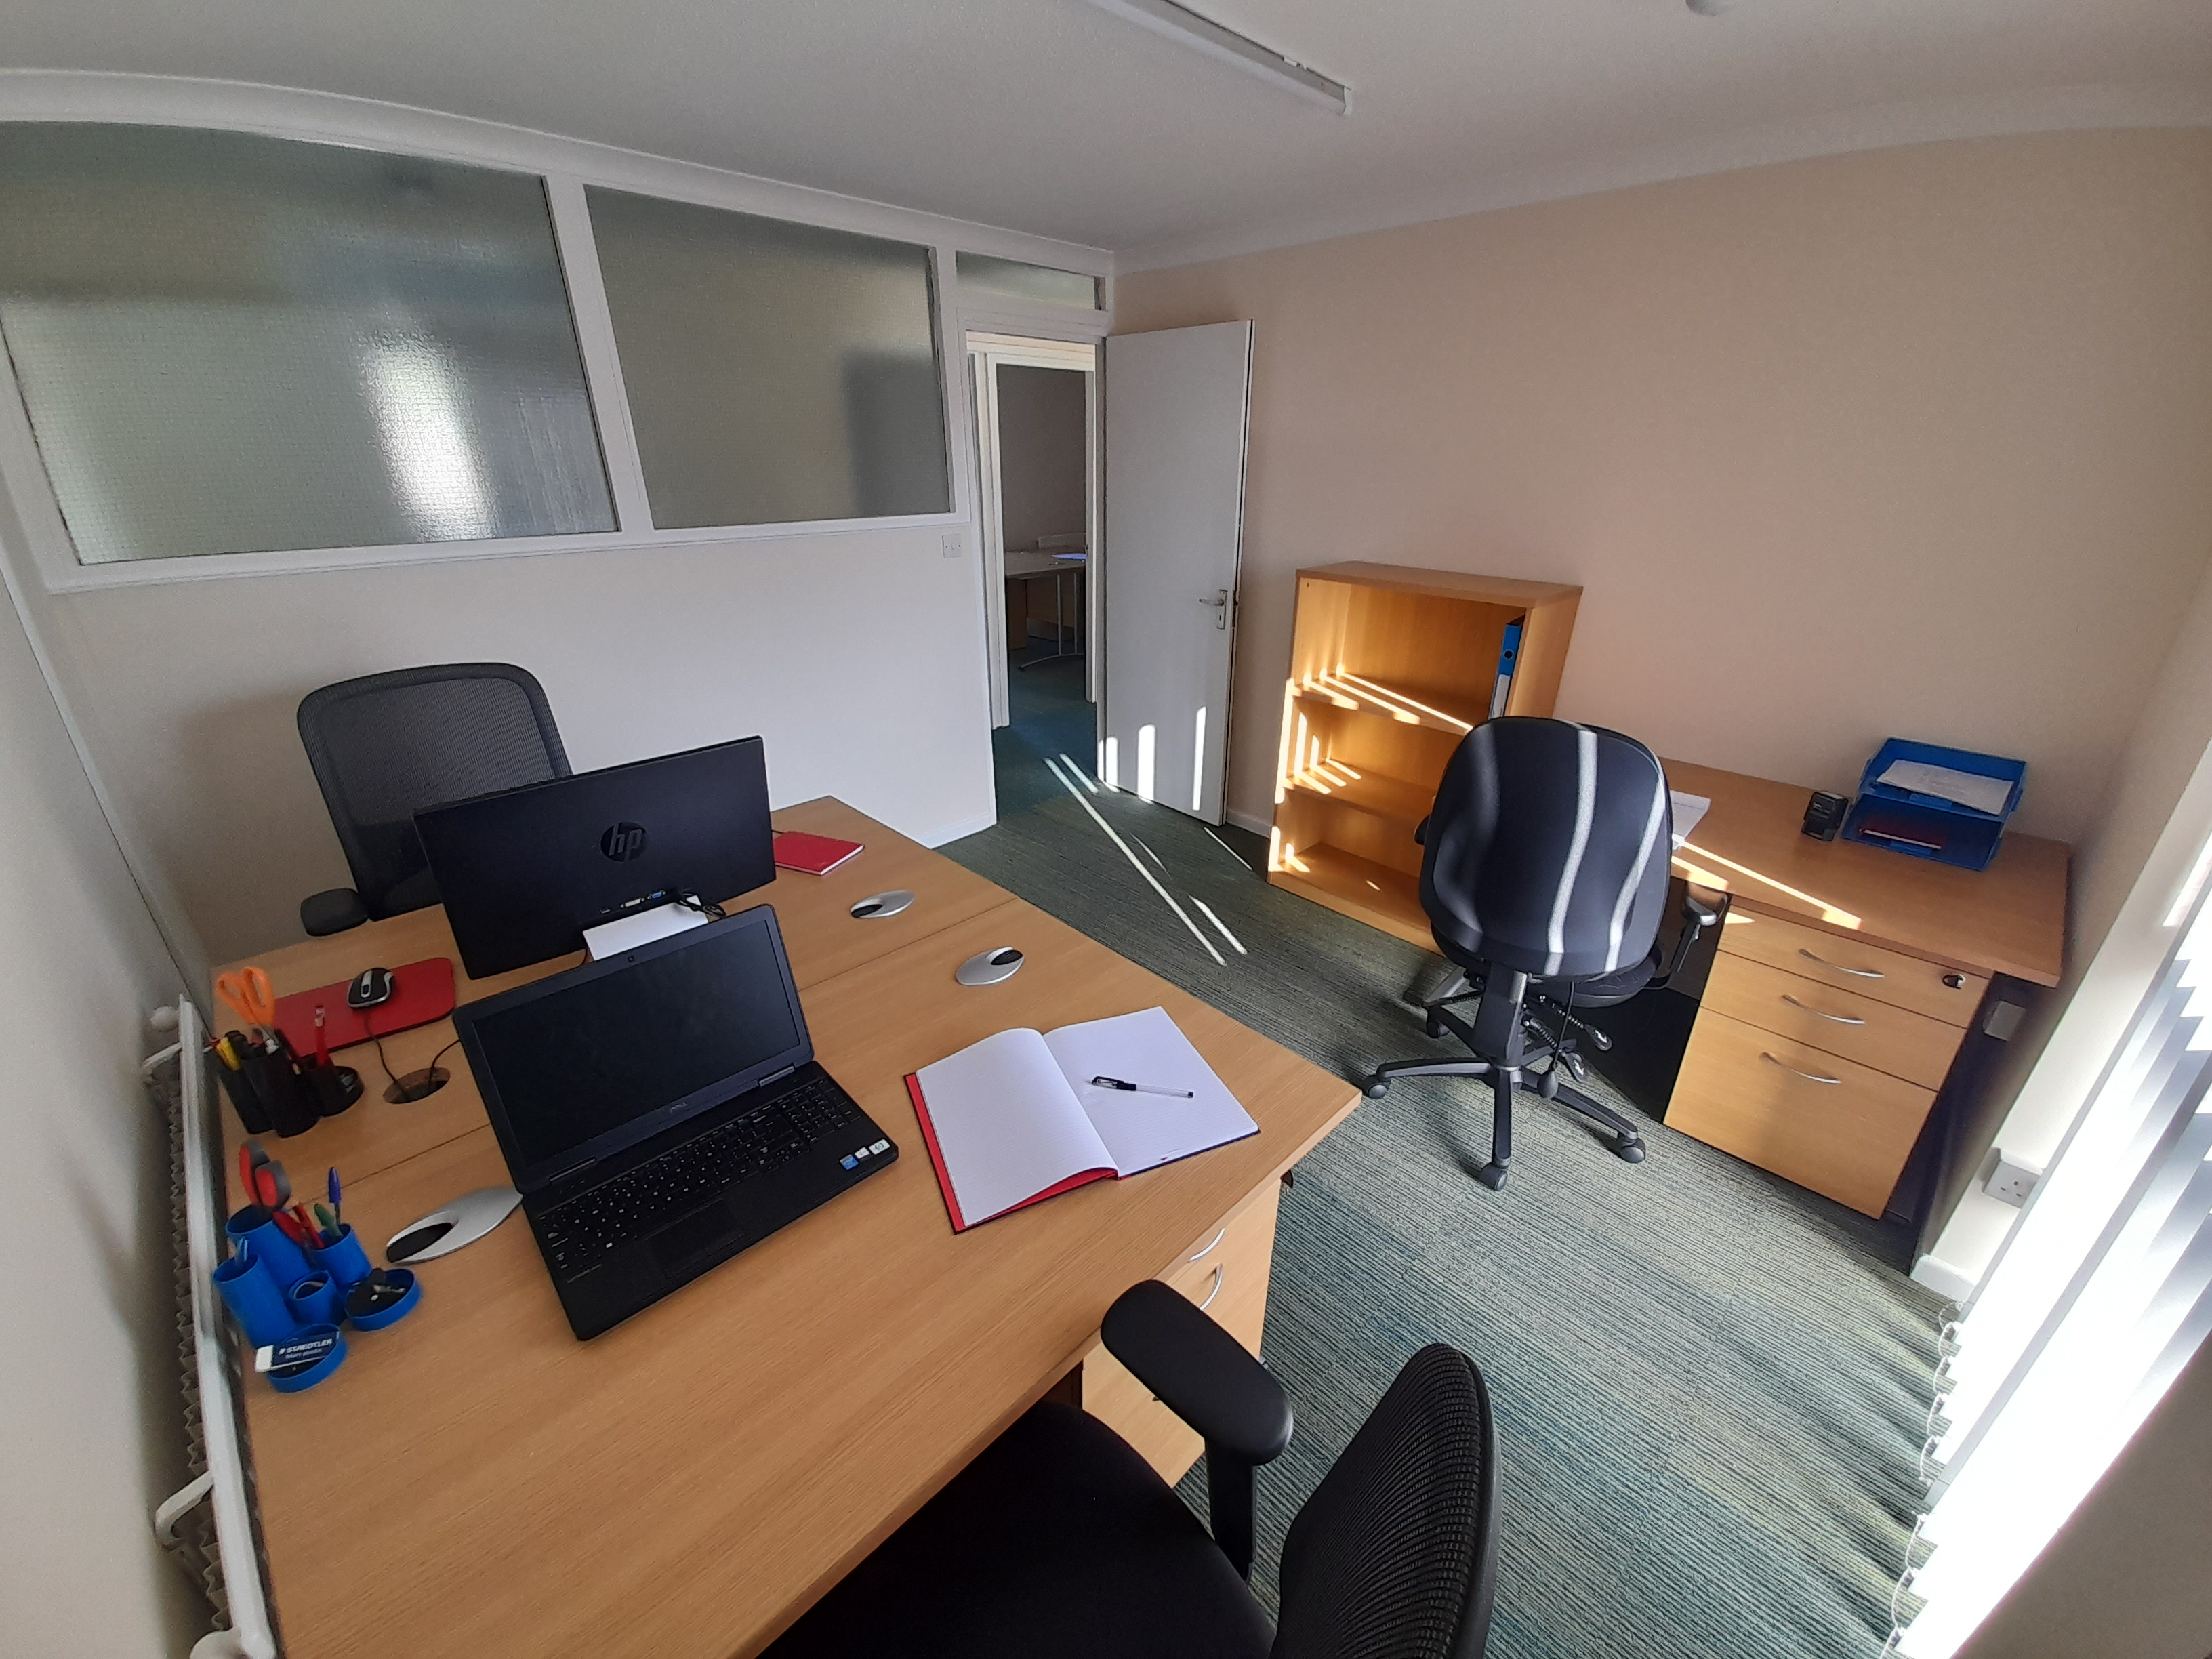 Serviced Offices, Serviced Offices Plympton, Serviced Offices Plymouth, Huxley Hub Plymouth, Huxley Hub Plympton, Easy in Easy Out, Serviced Office Rental, Easy in Easy out Office Rental Plymouth